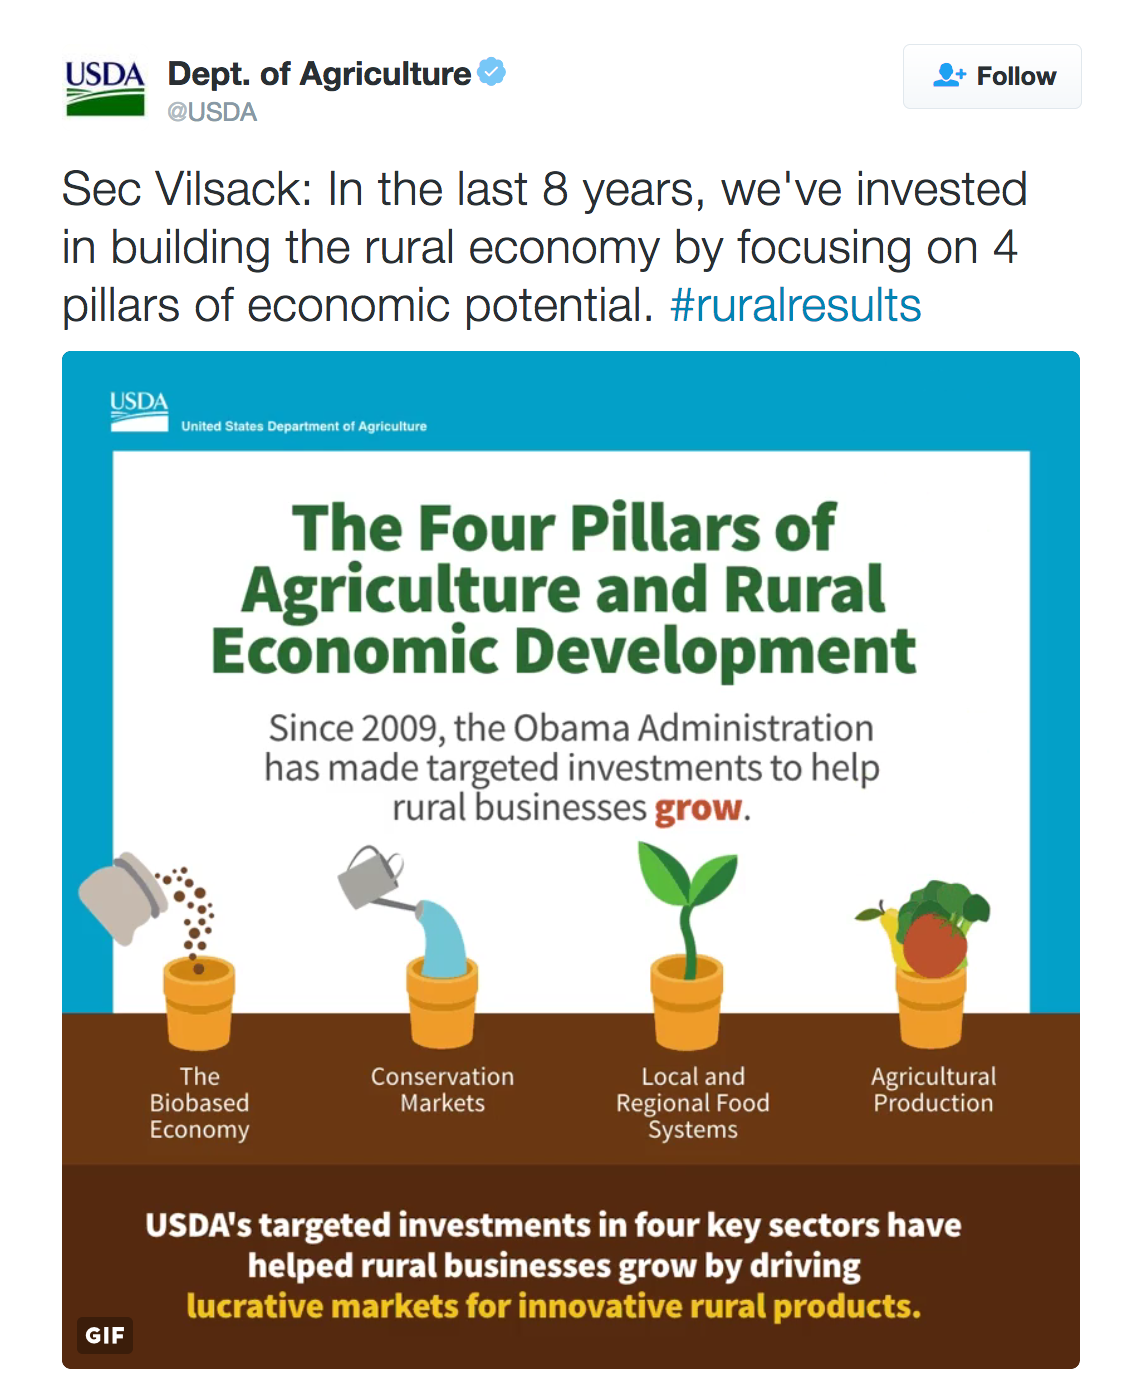 Sec Vilsack: In the last 8 years, we've invested in building the rural economy by focusing on 4 pillars of economic potential. #ruralresults